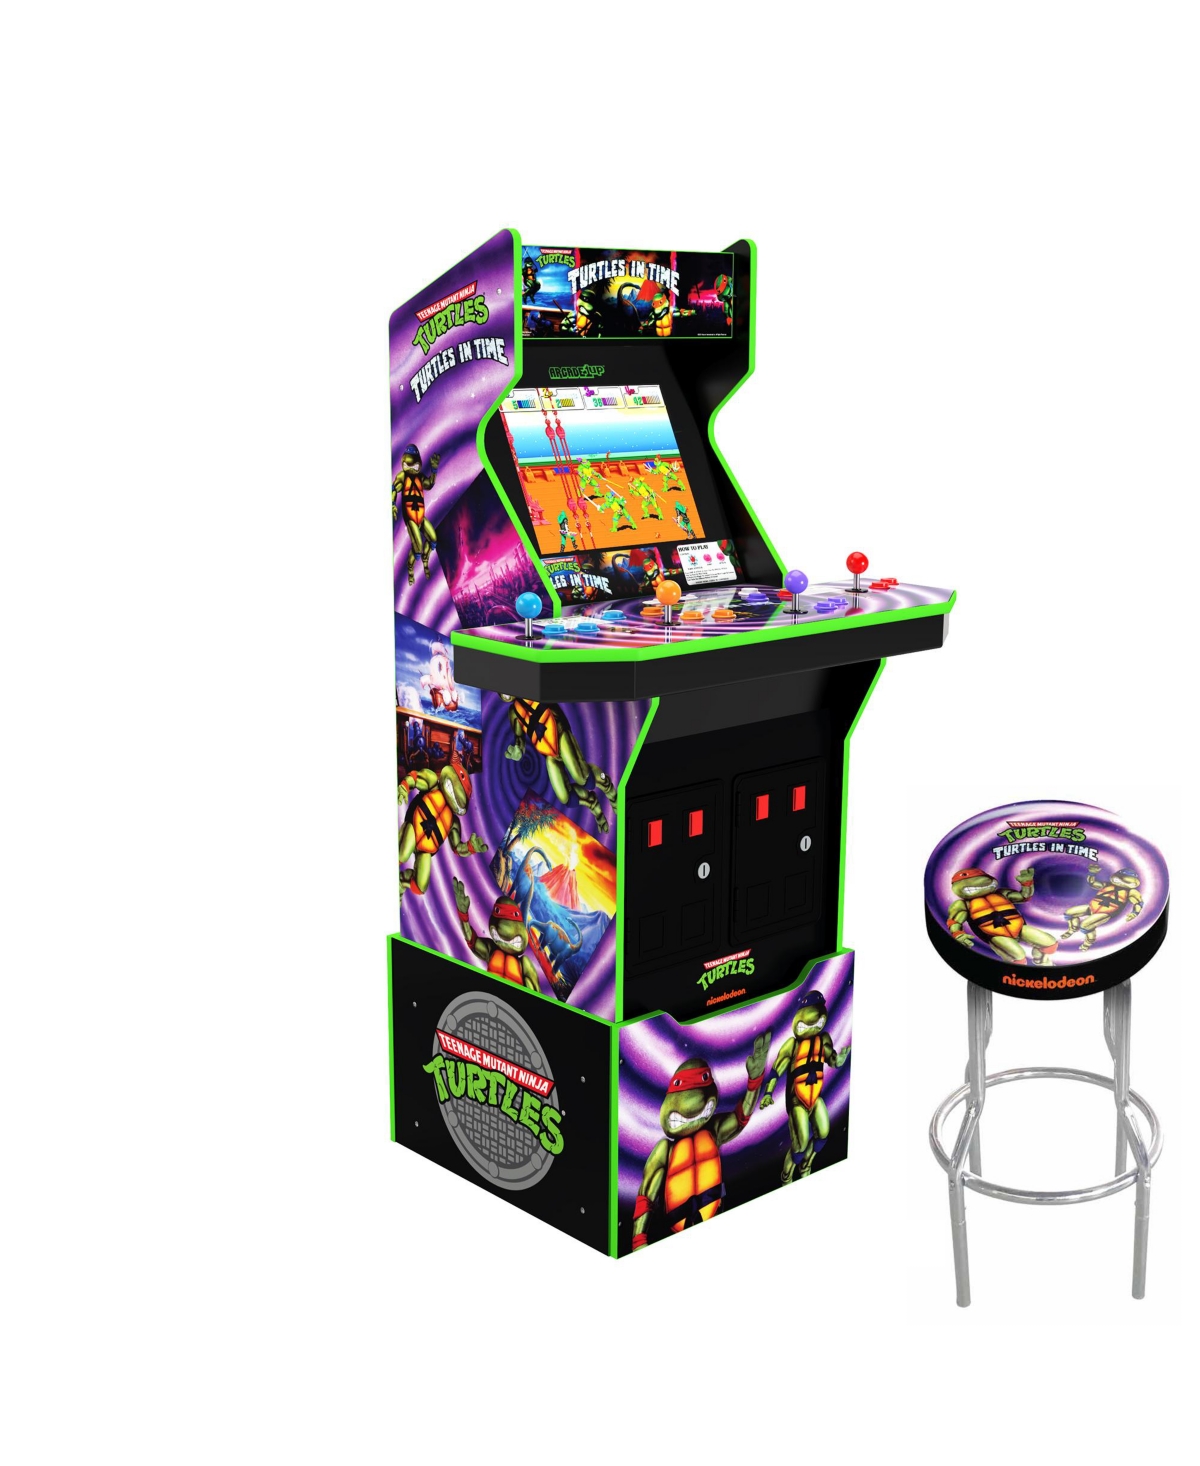 Arcade 1UP Turtles in Time Arcade Game